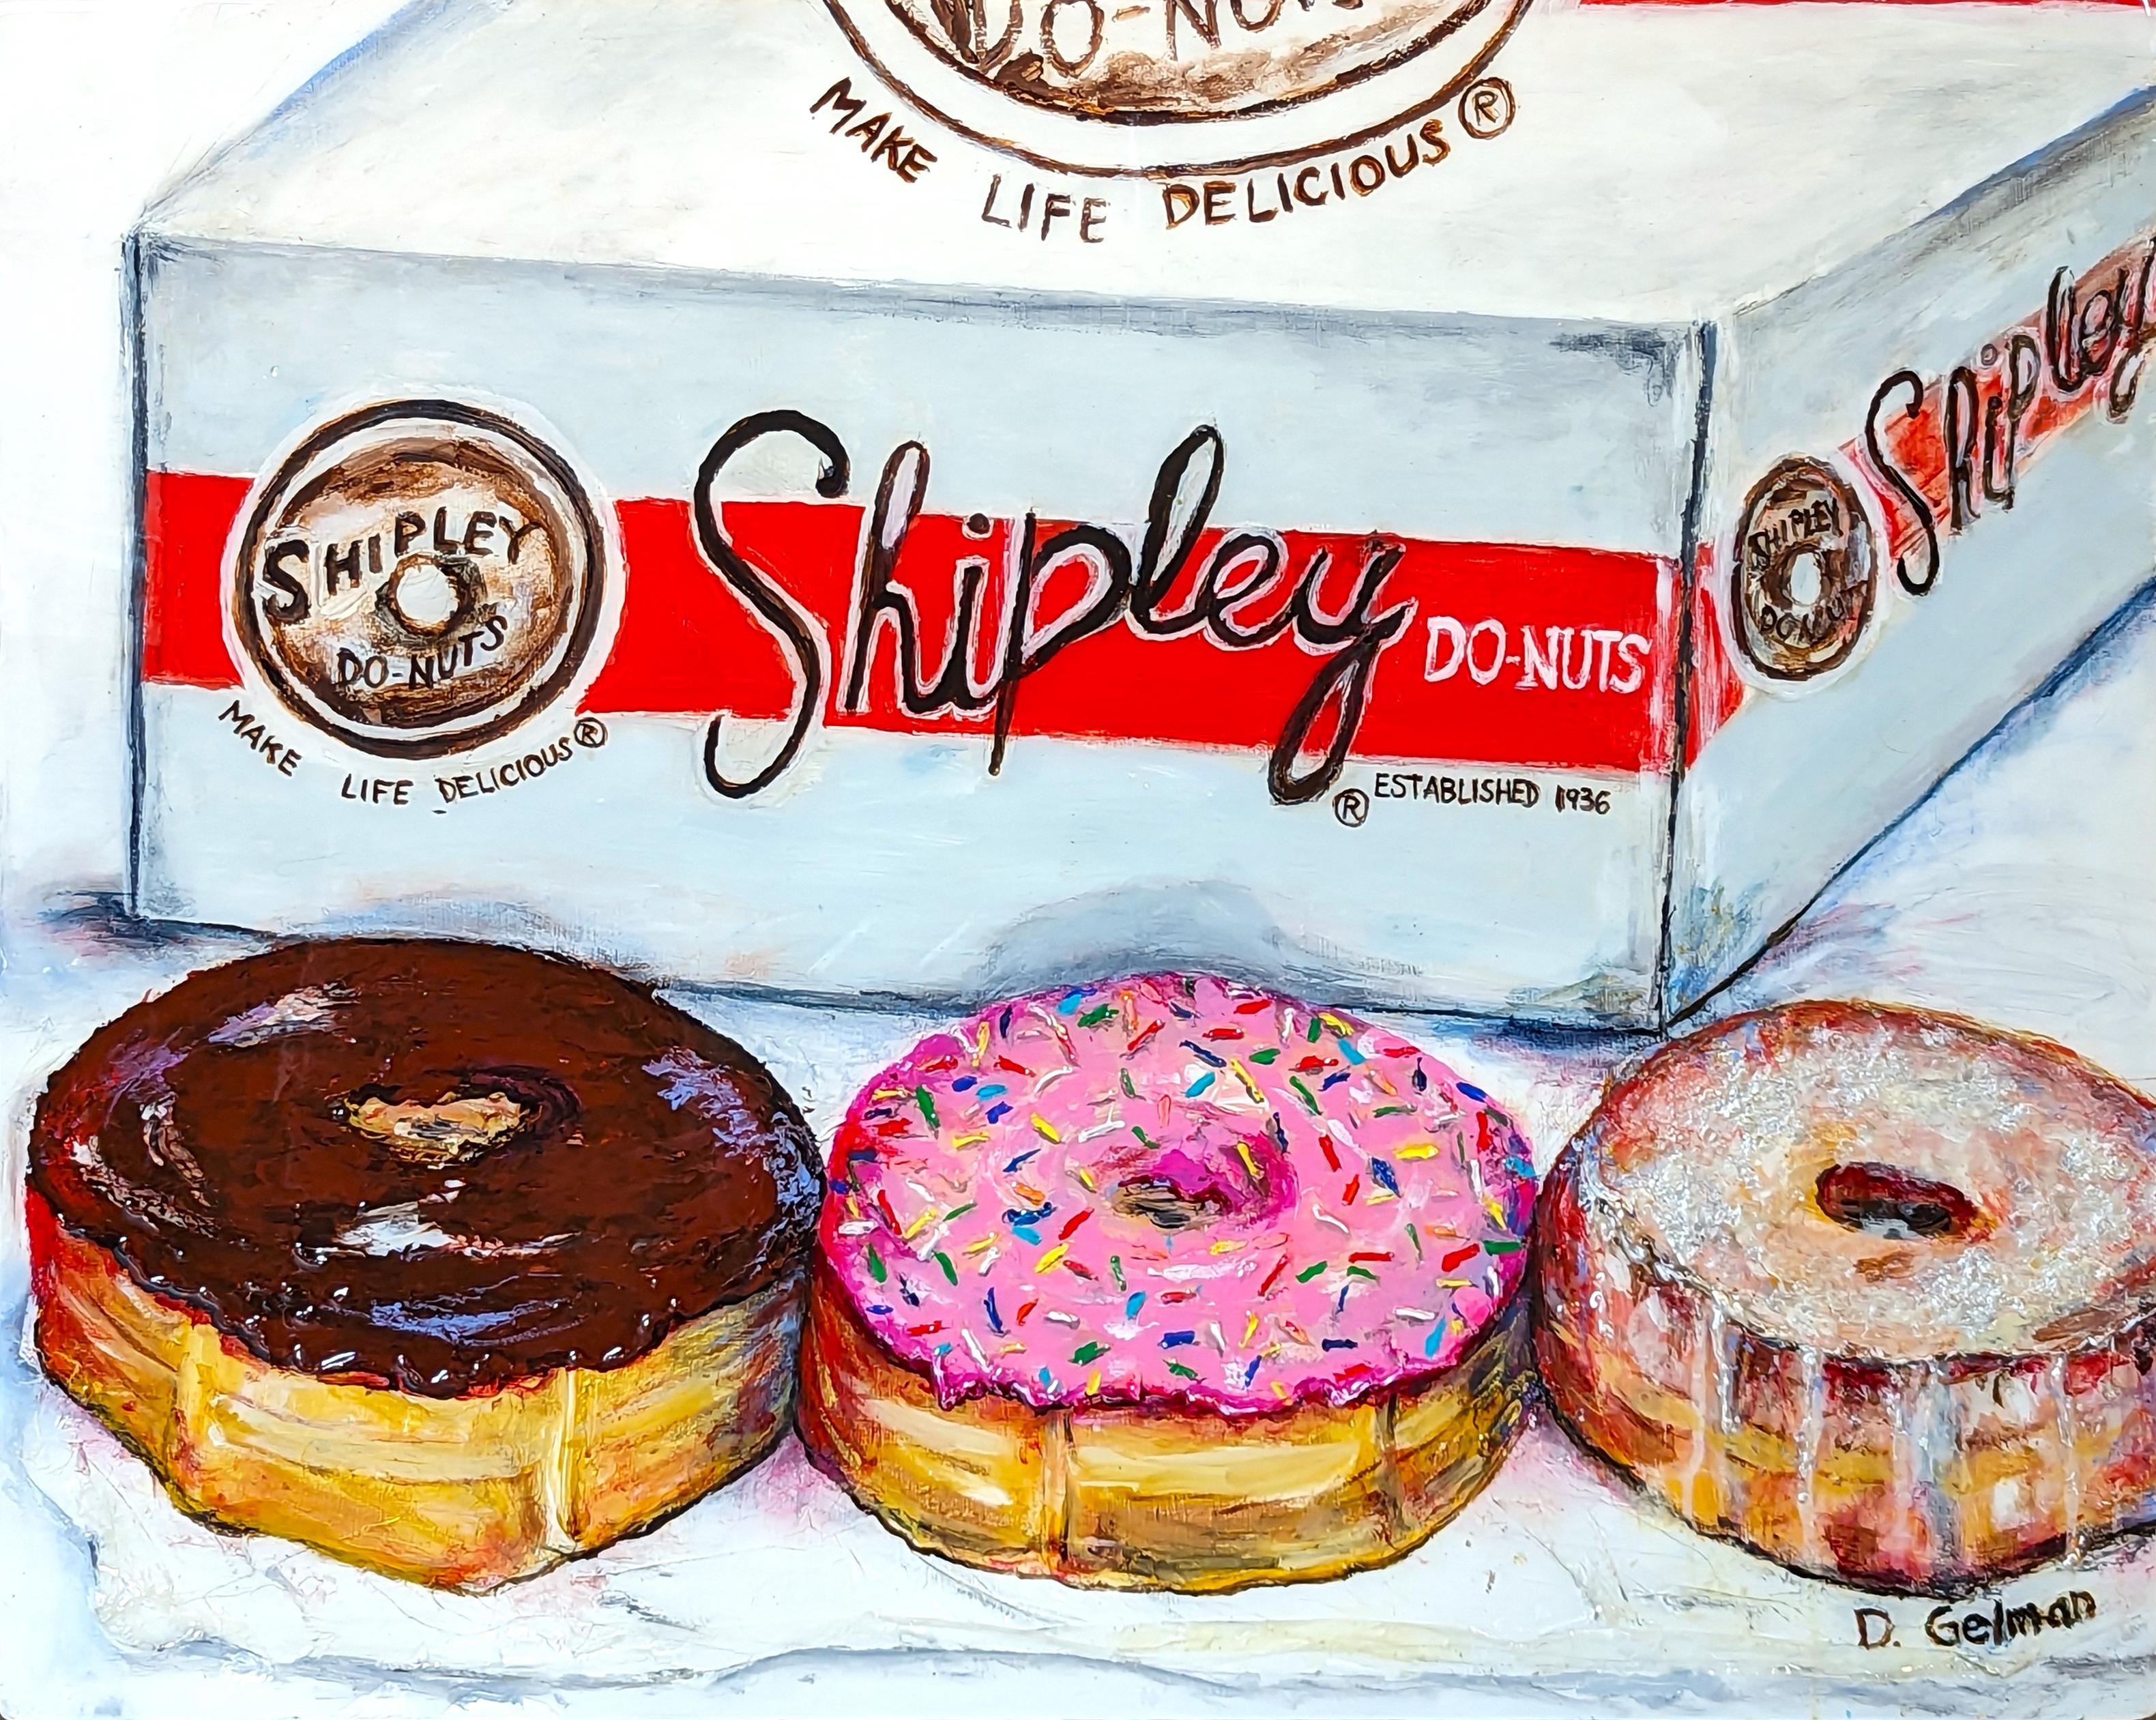 “Shipley's Do-Nuts” Contemporary Colorful Mixed Media Food Collage